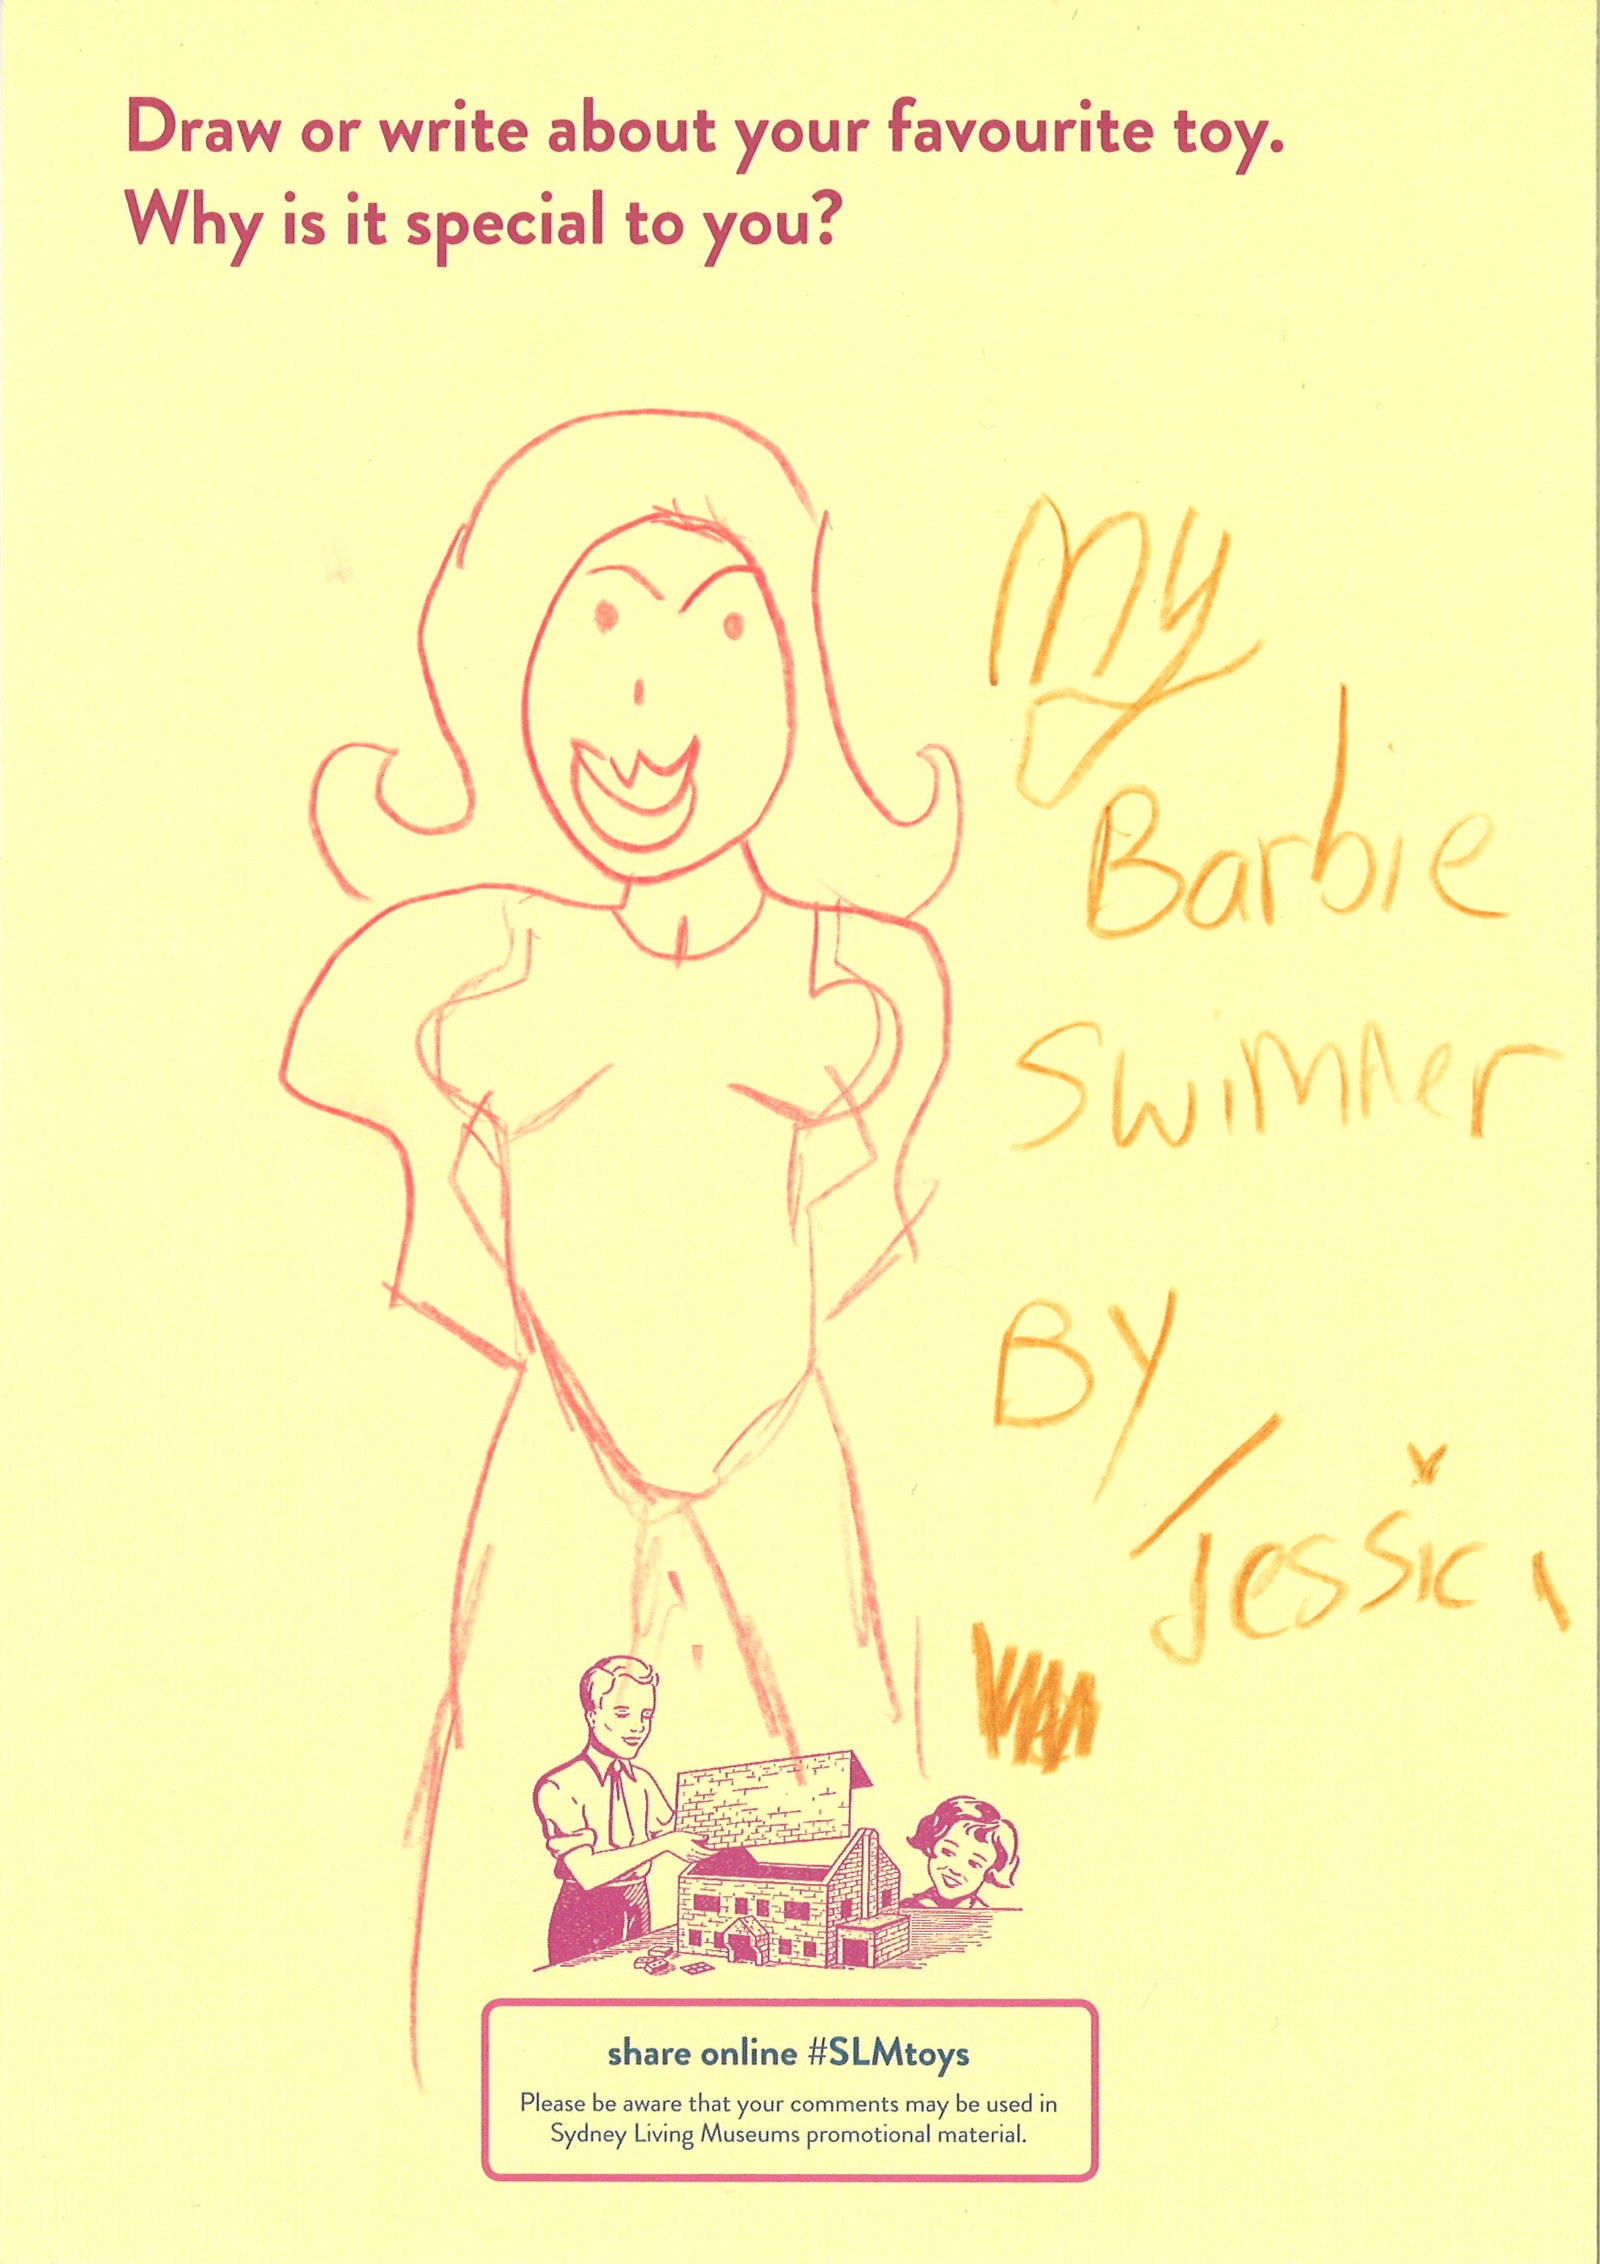 A drawing of Barbie in a swimming costume